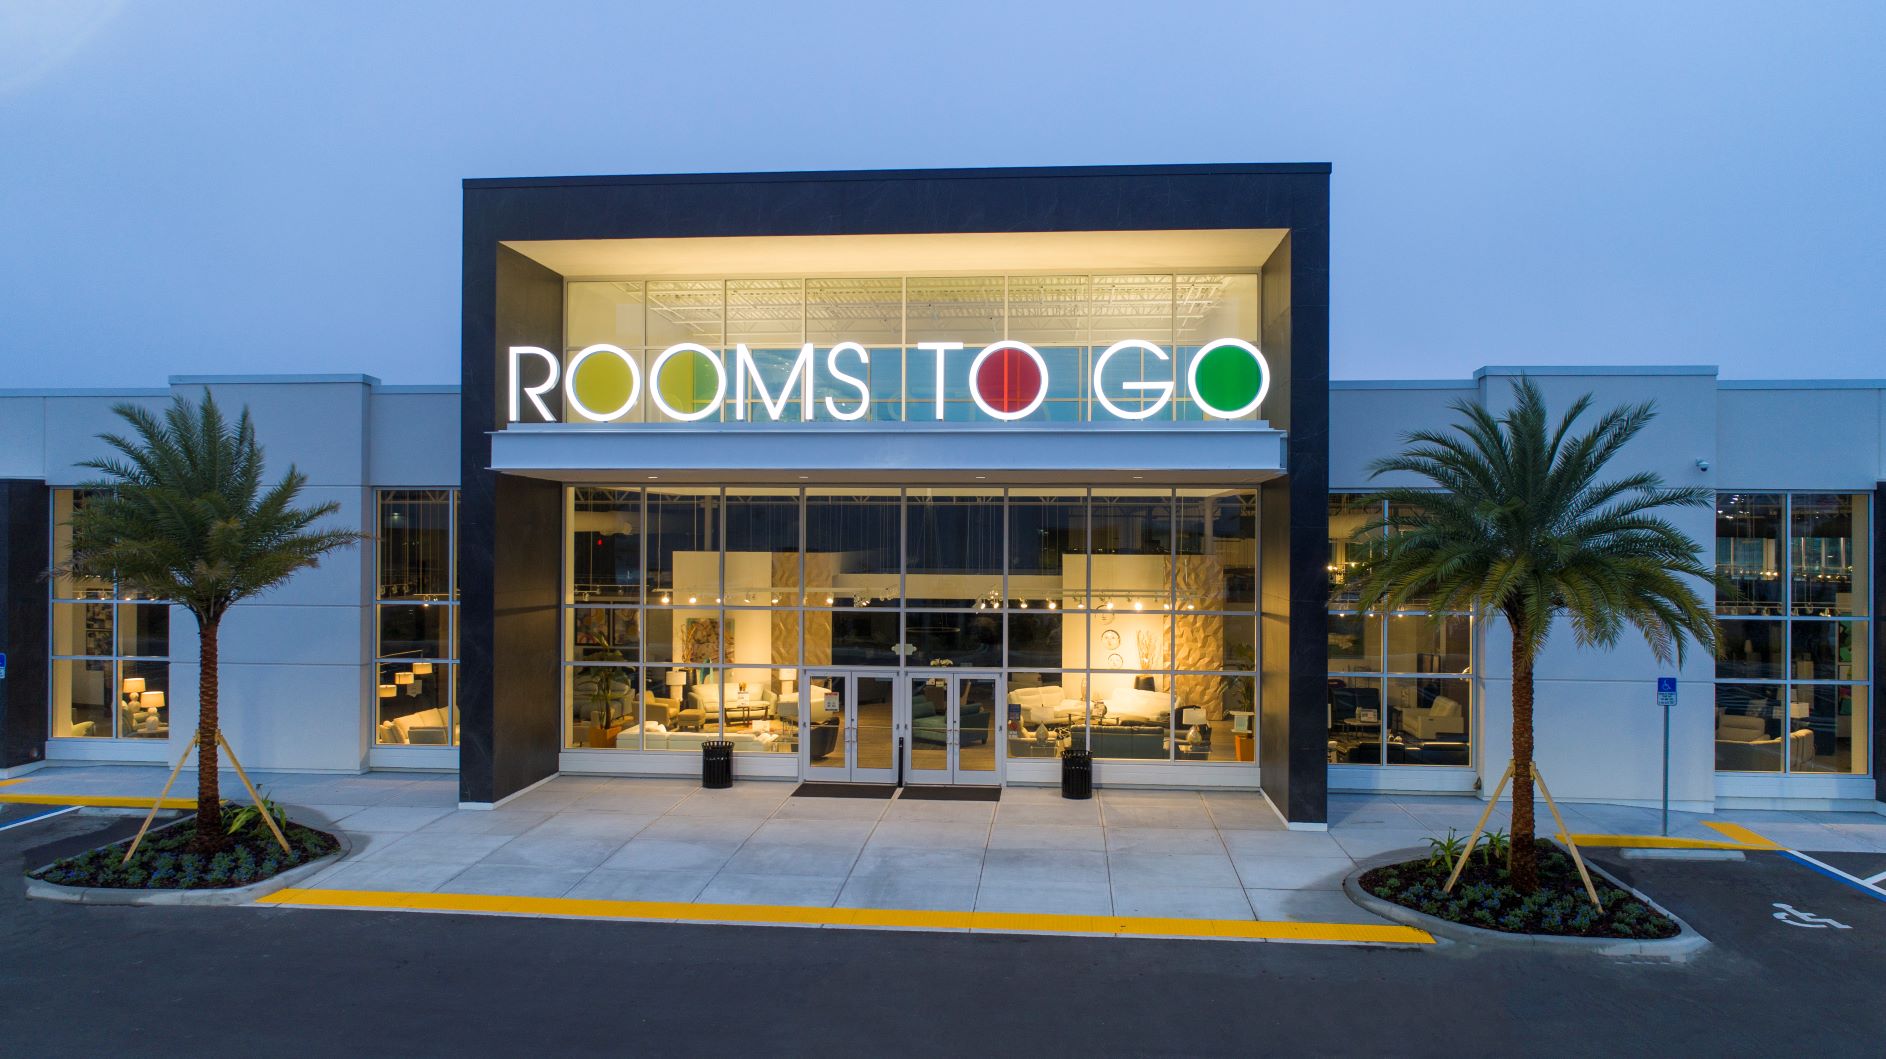 ROOMS TO GO – TAMPA, FL